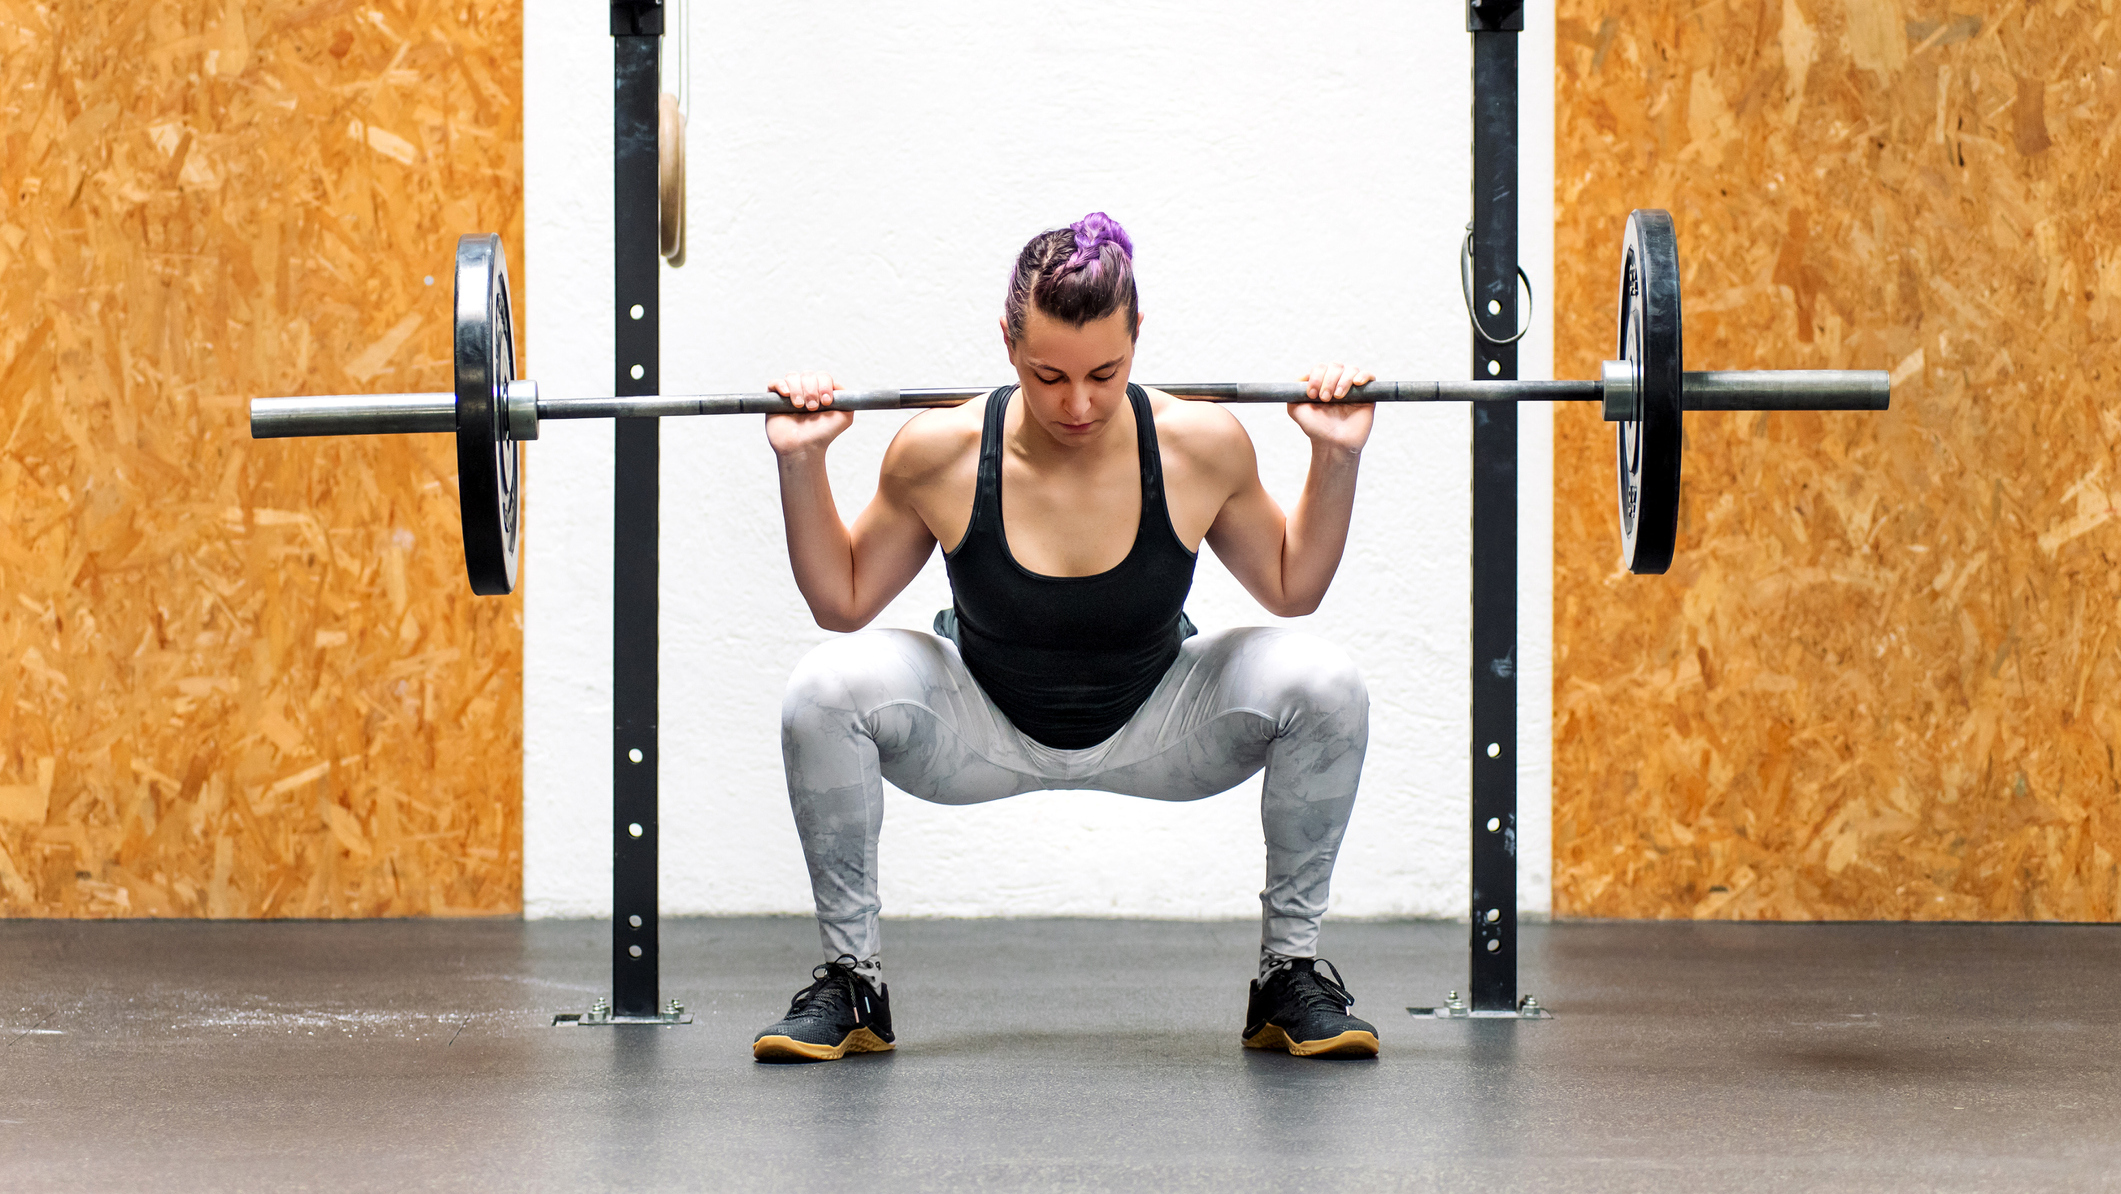 11 benefits of squats that will improve your overall fitness - The Manual